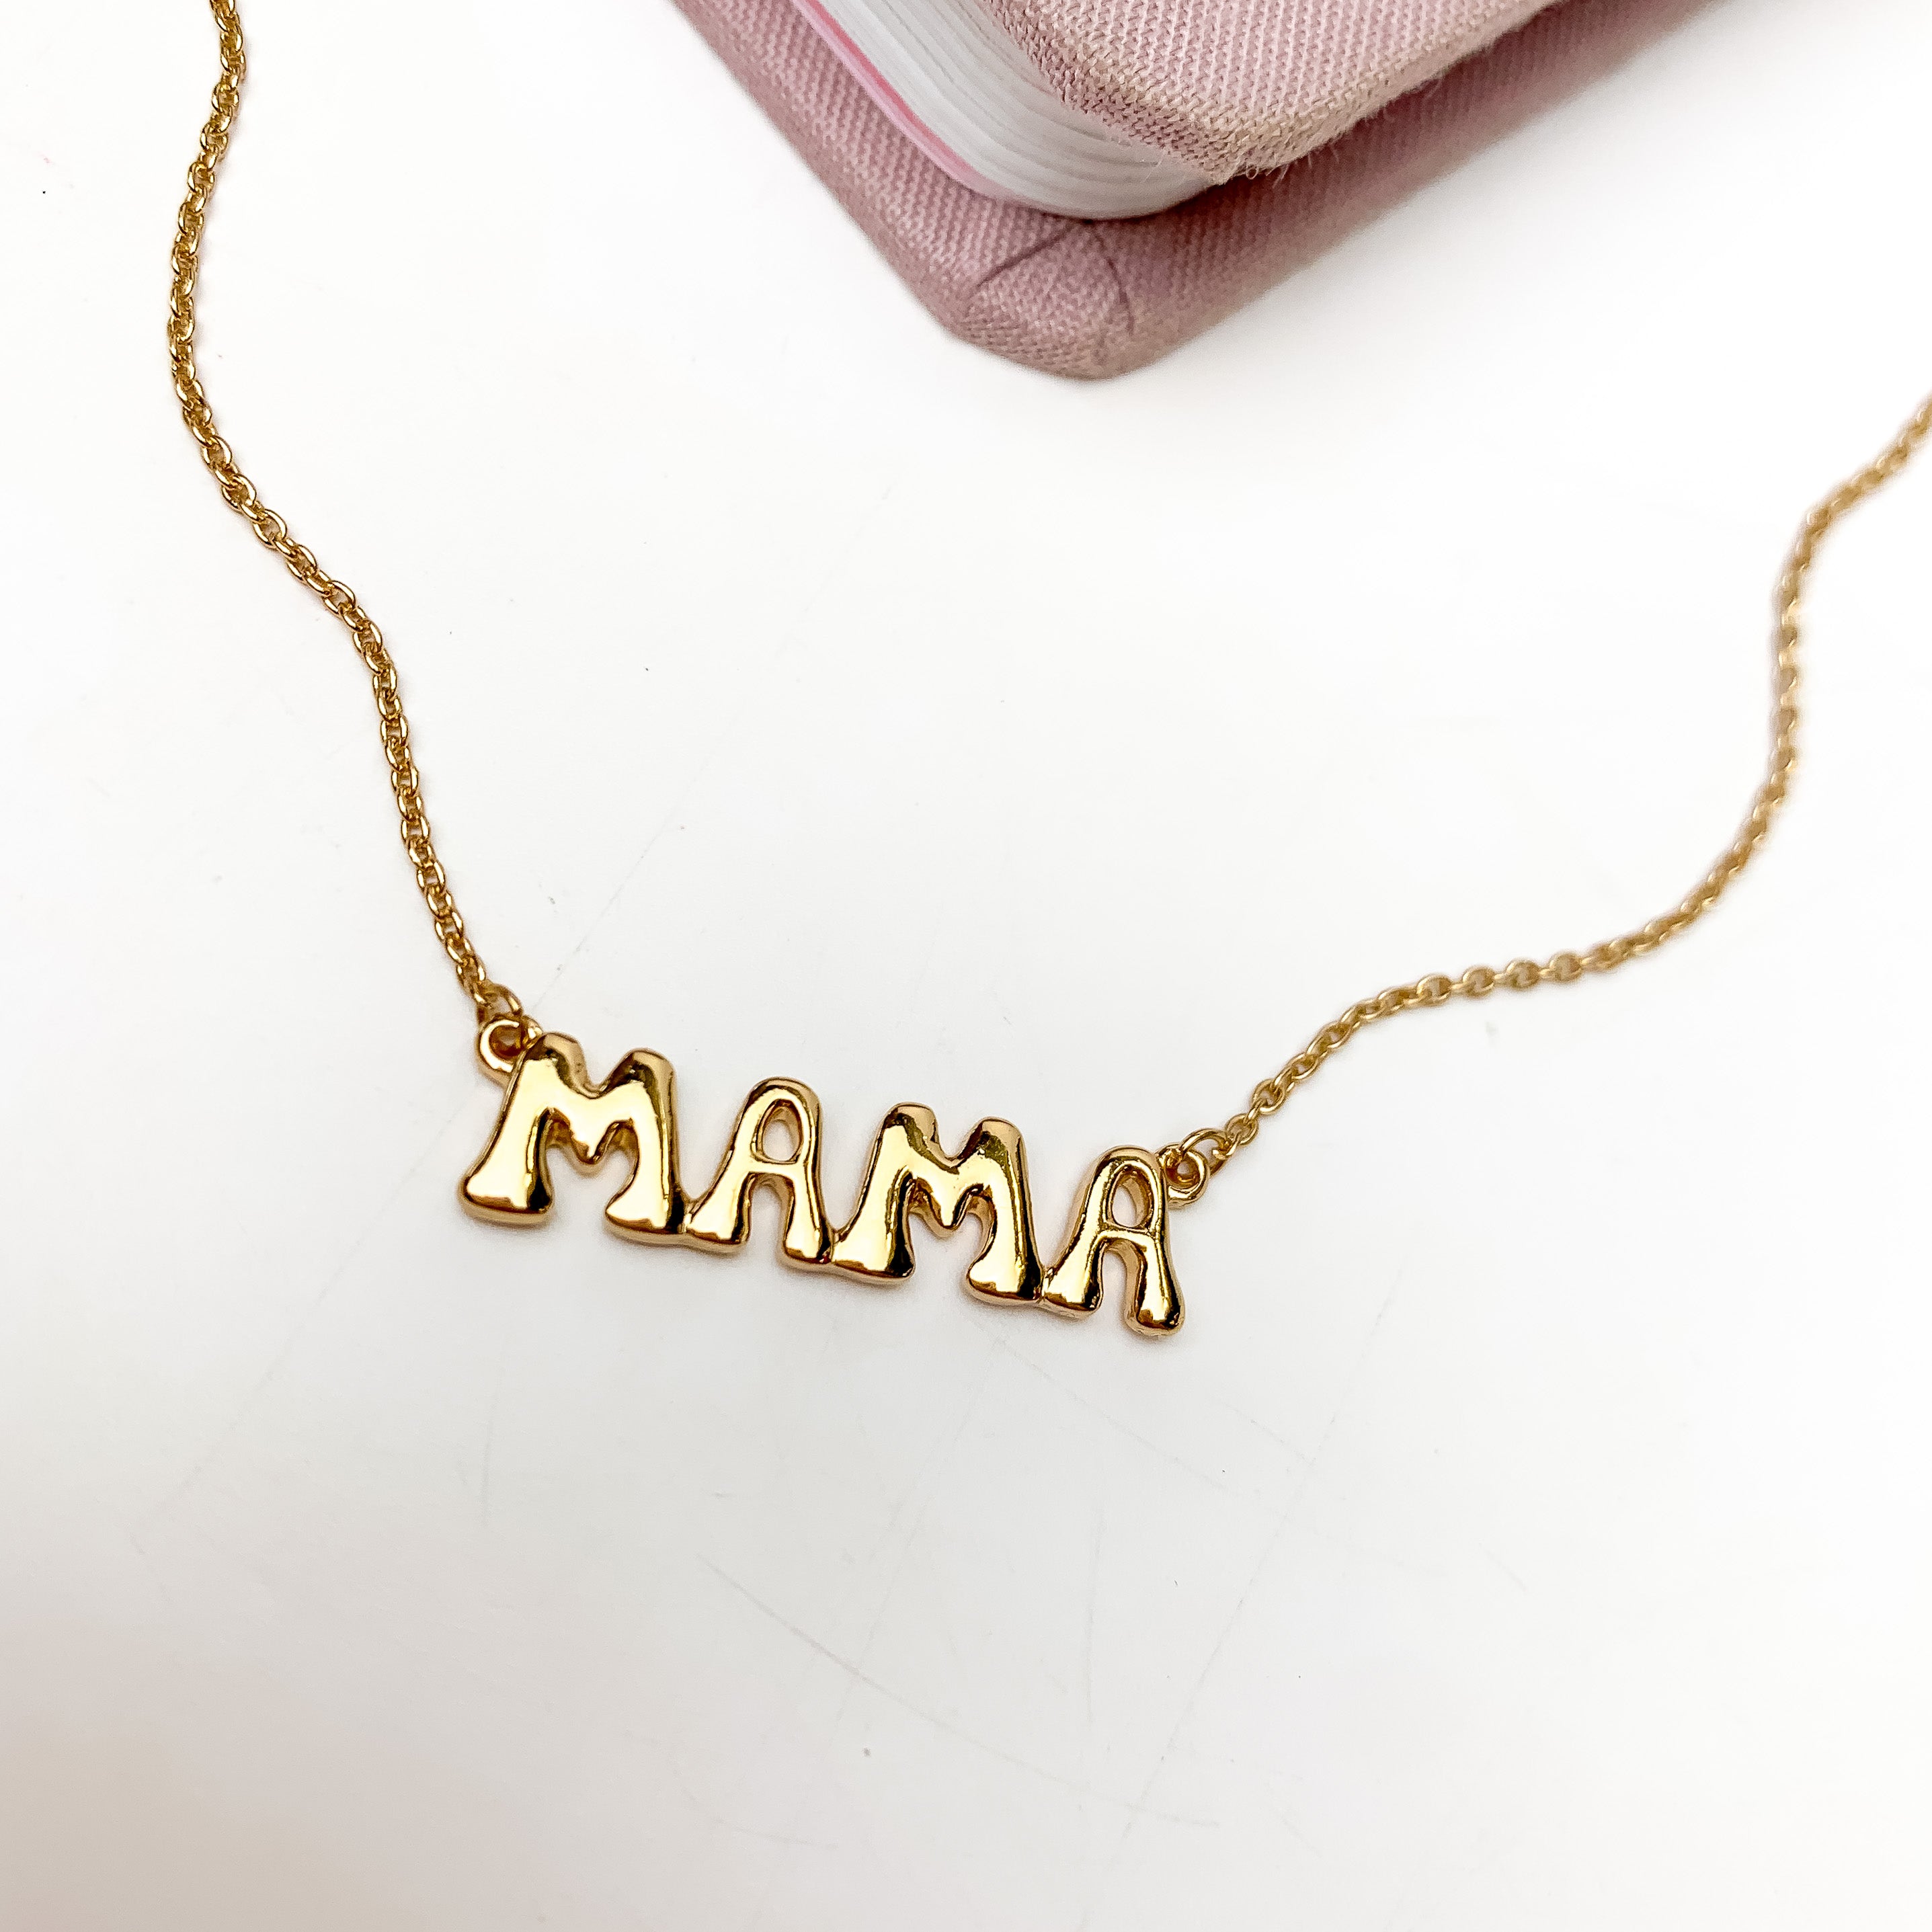 Mama Bubble Letter Chain Necklace in Gold Tone - Giddy Up Glamour Boutique